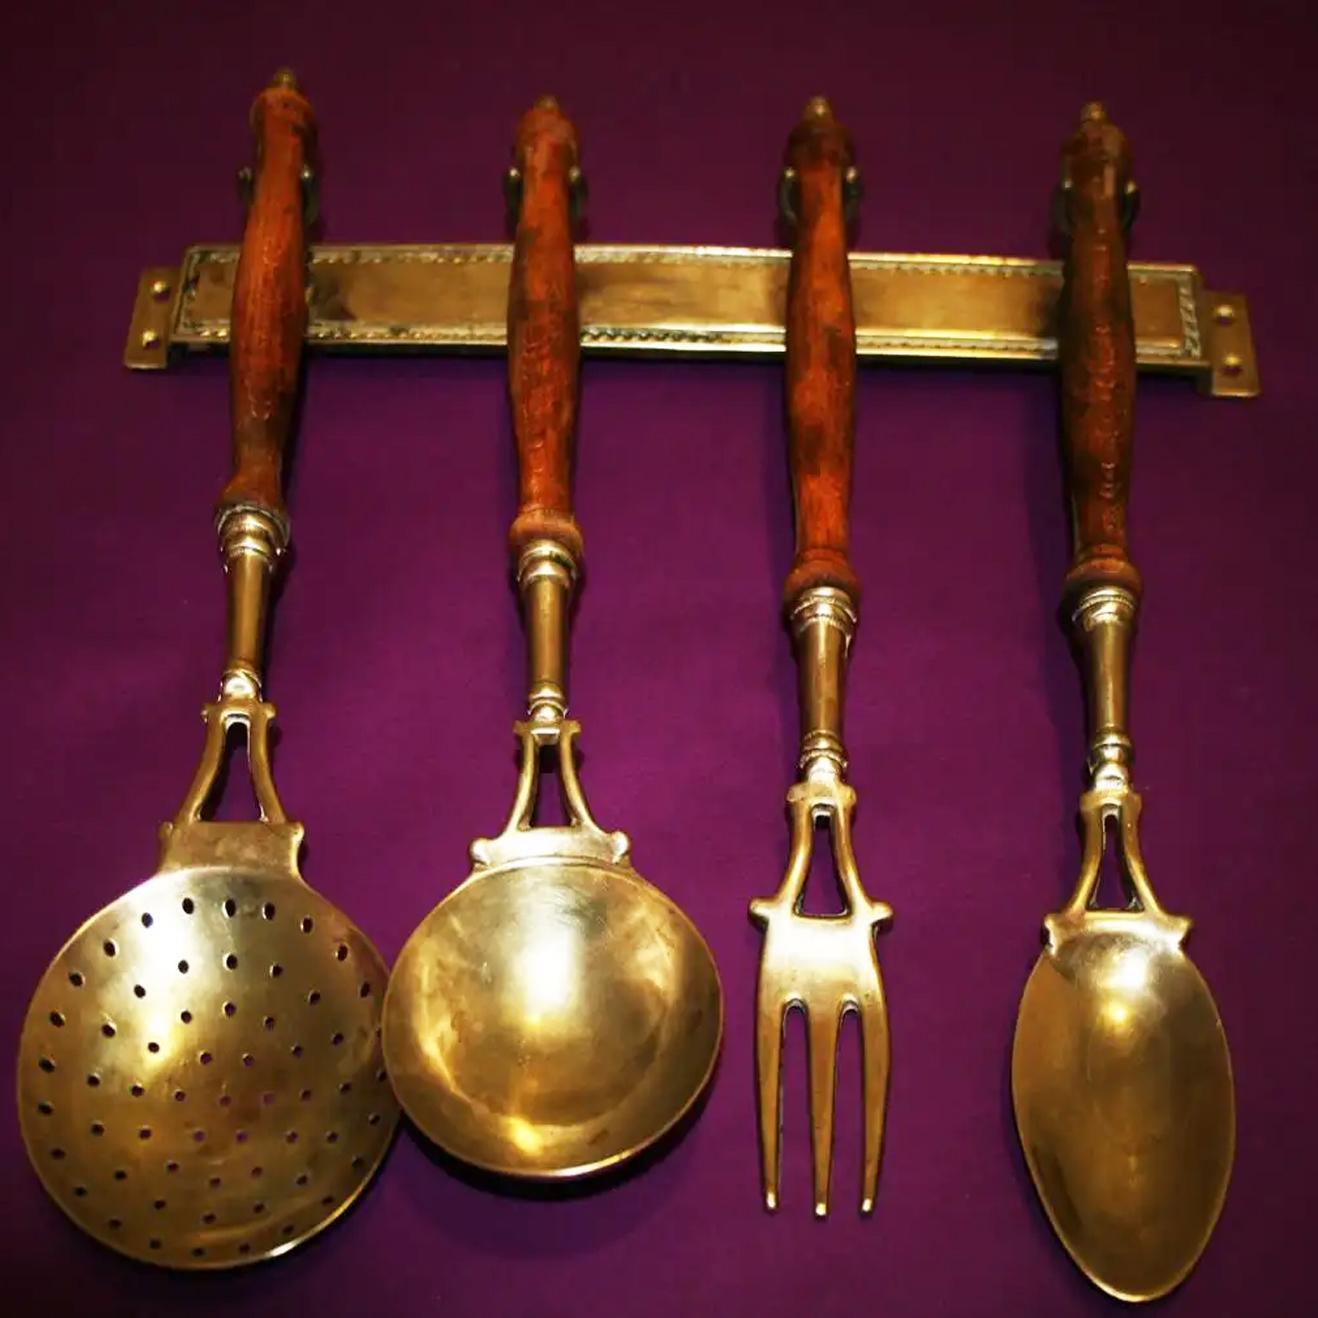 Old Kitchen Utensils Made of Brass with Hanging Bar, Early 20th Century